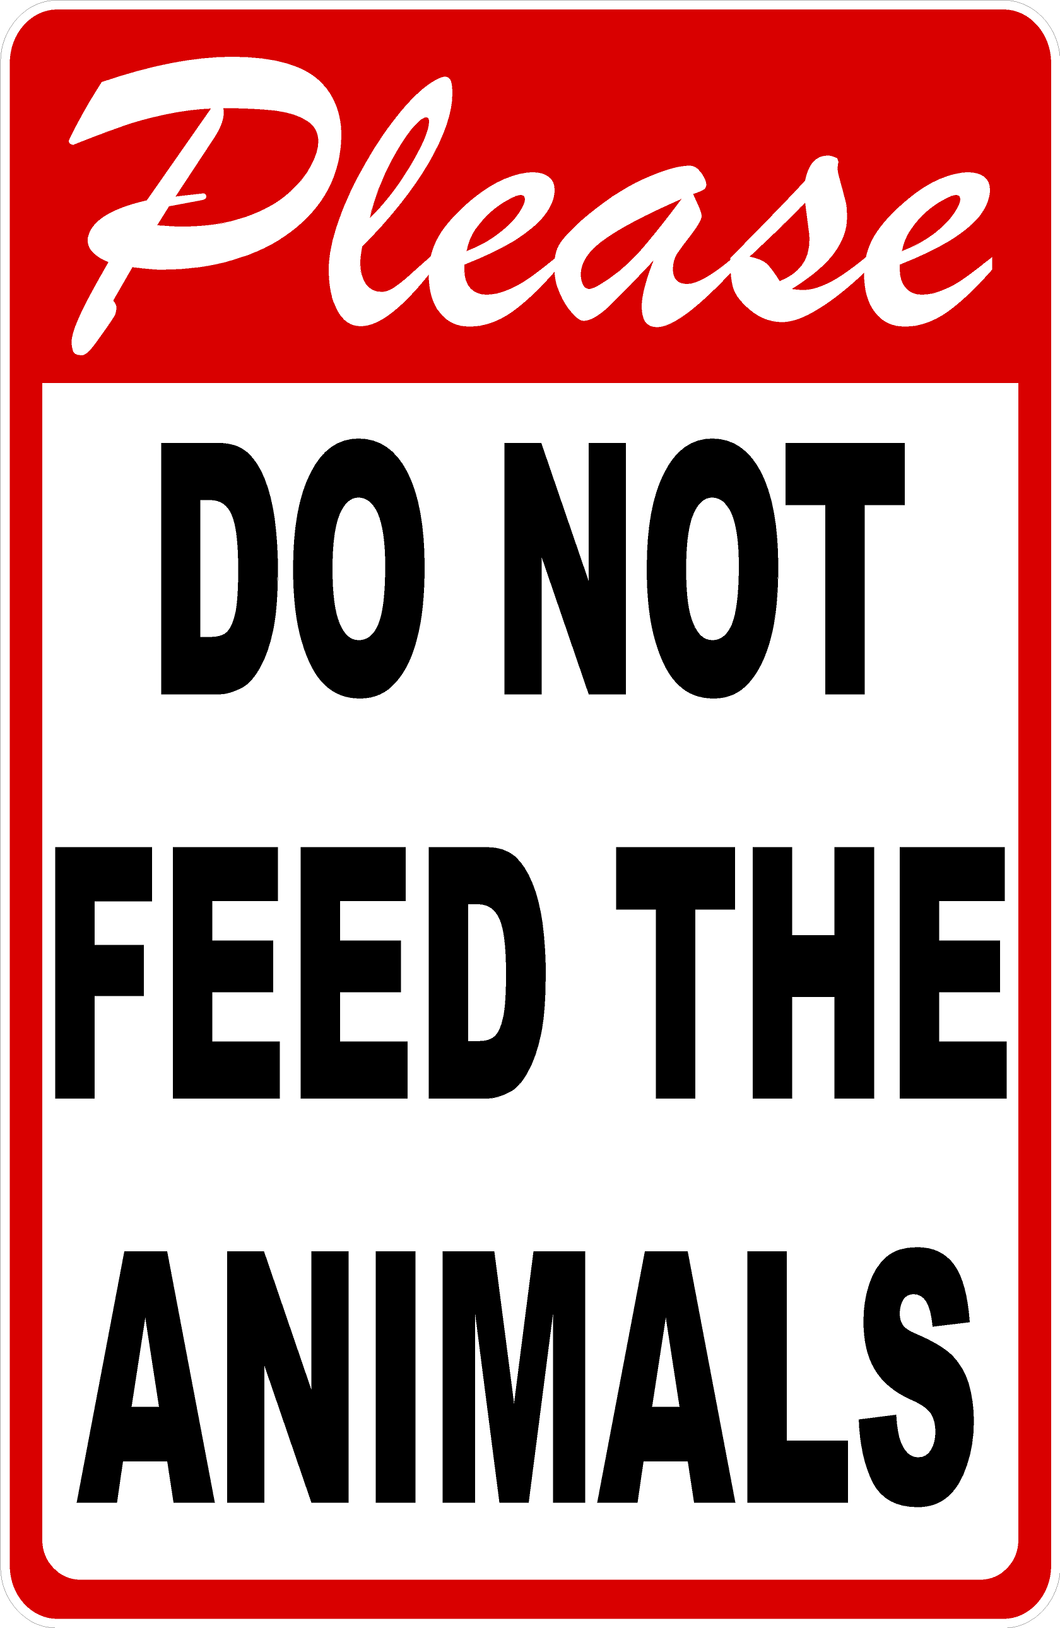 Do Not Feed Animals Sign